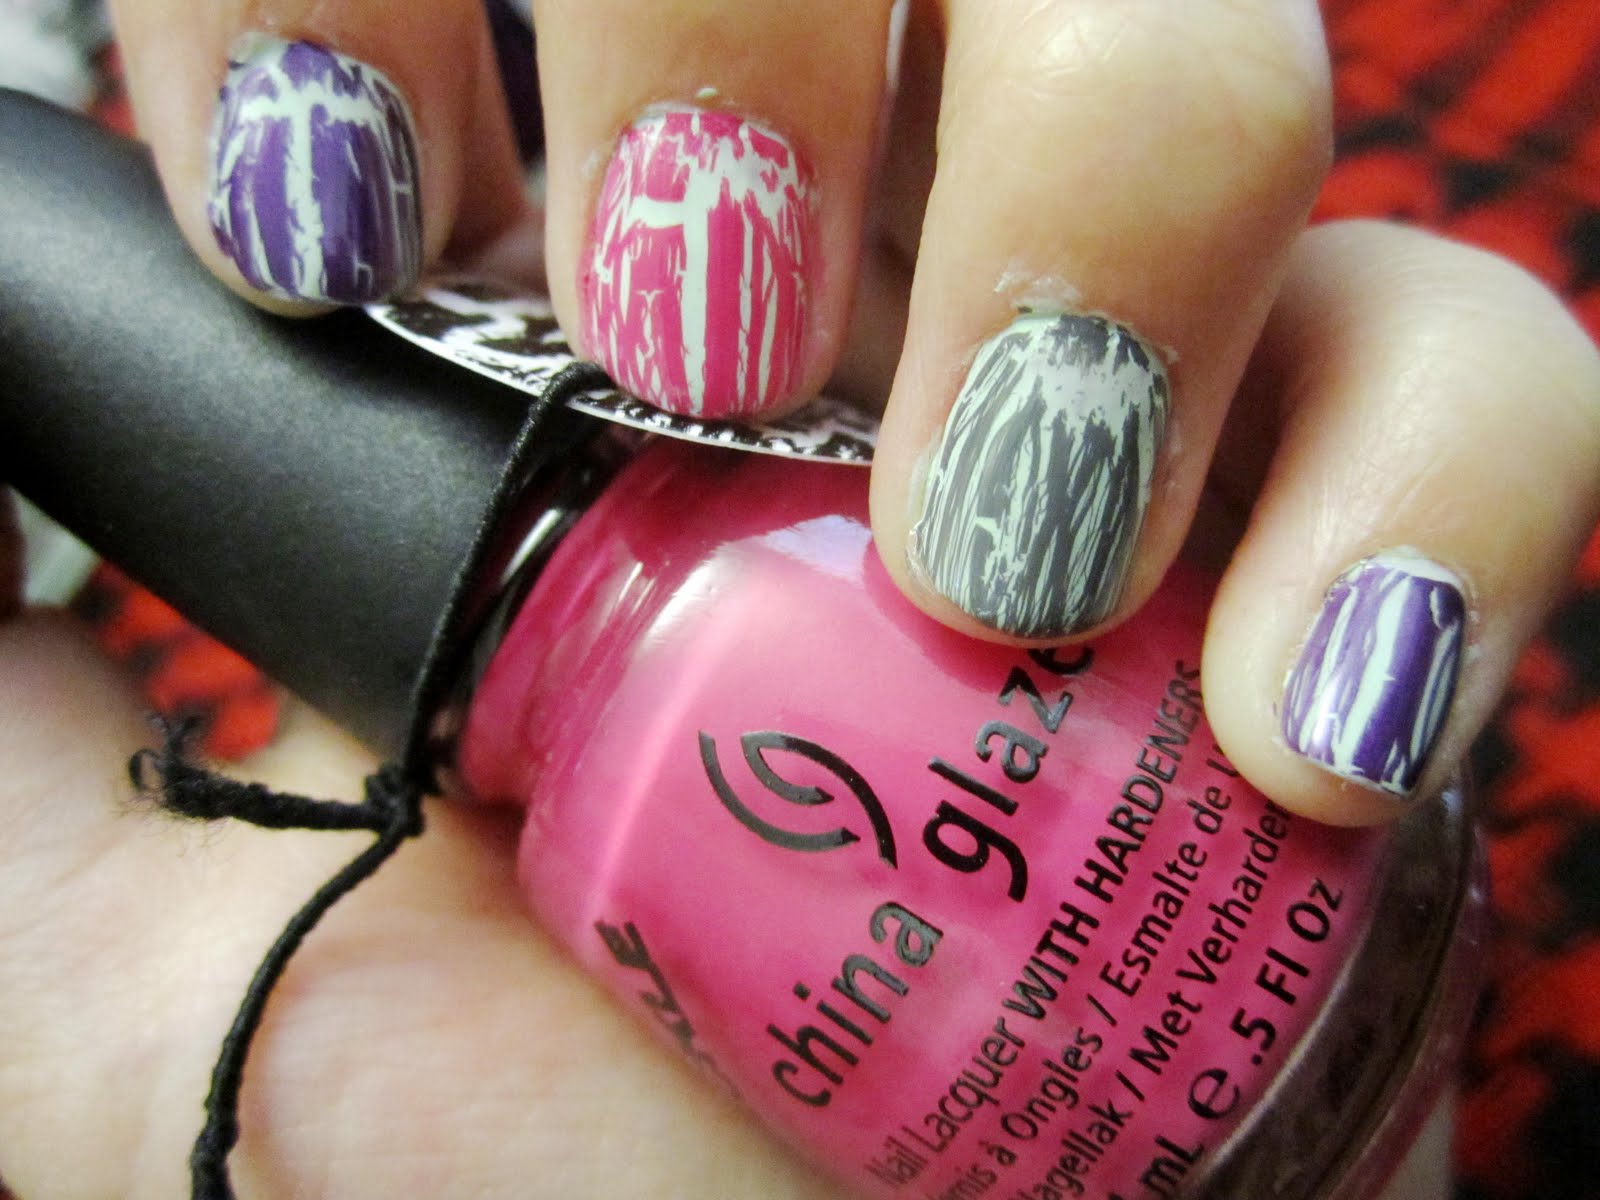 2. China Glaze Crackle Nail Polish in Crushed Candy - wide 4